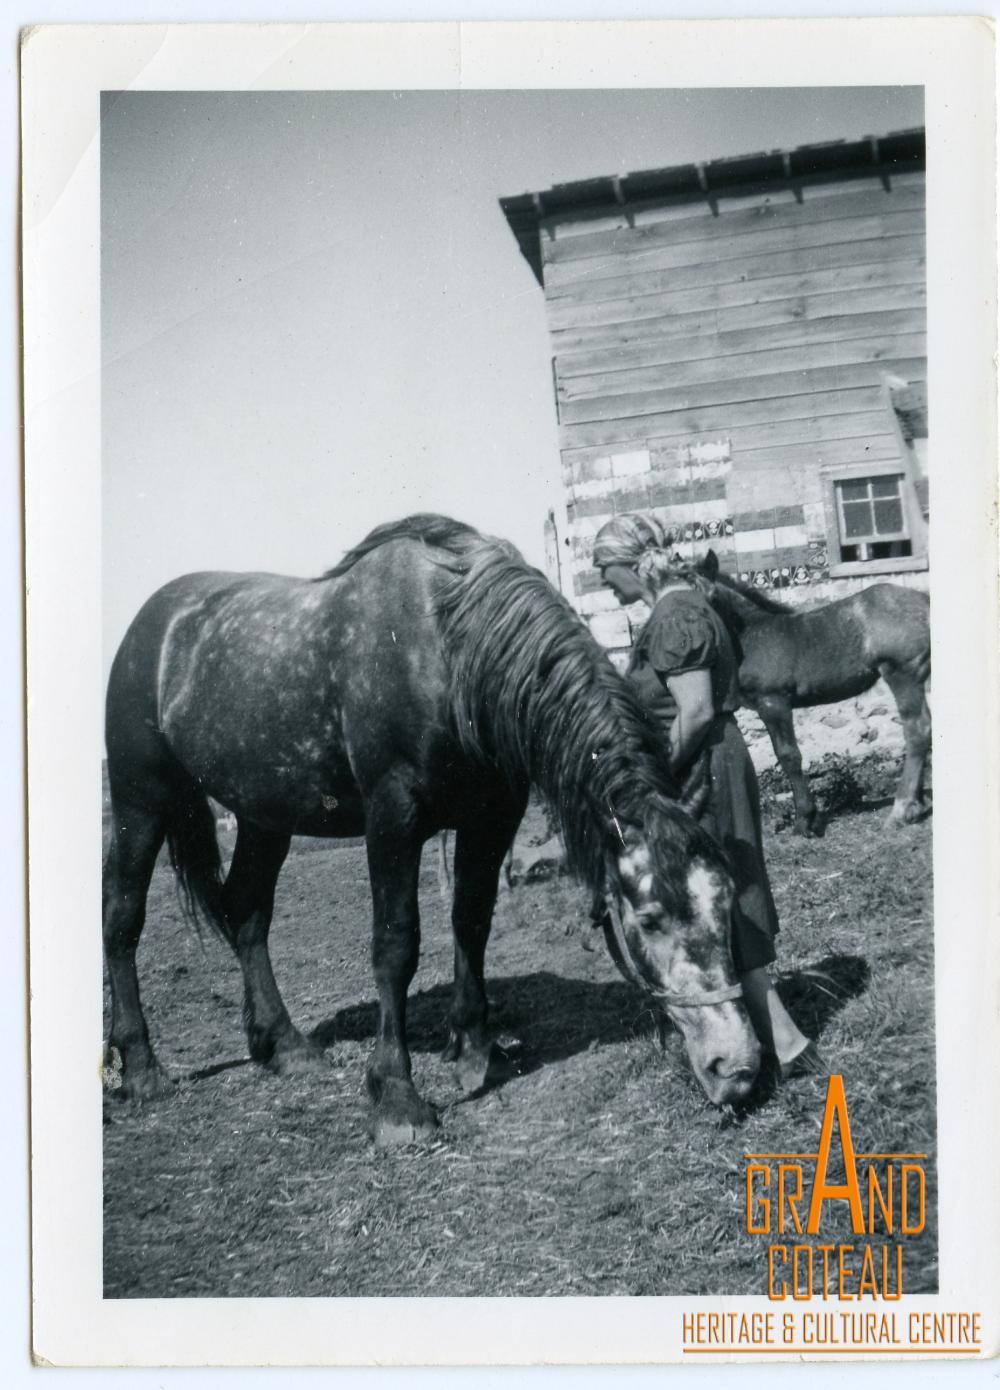 Photographic Print, unidentified woman posing with horses